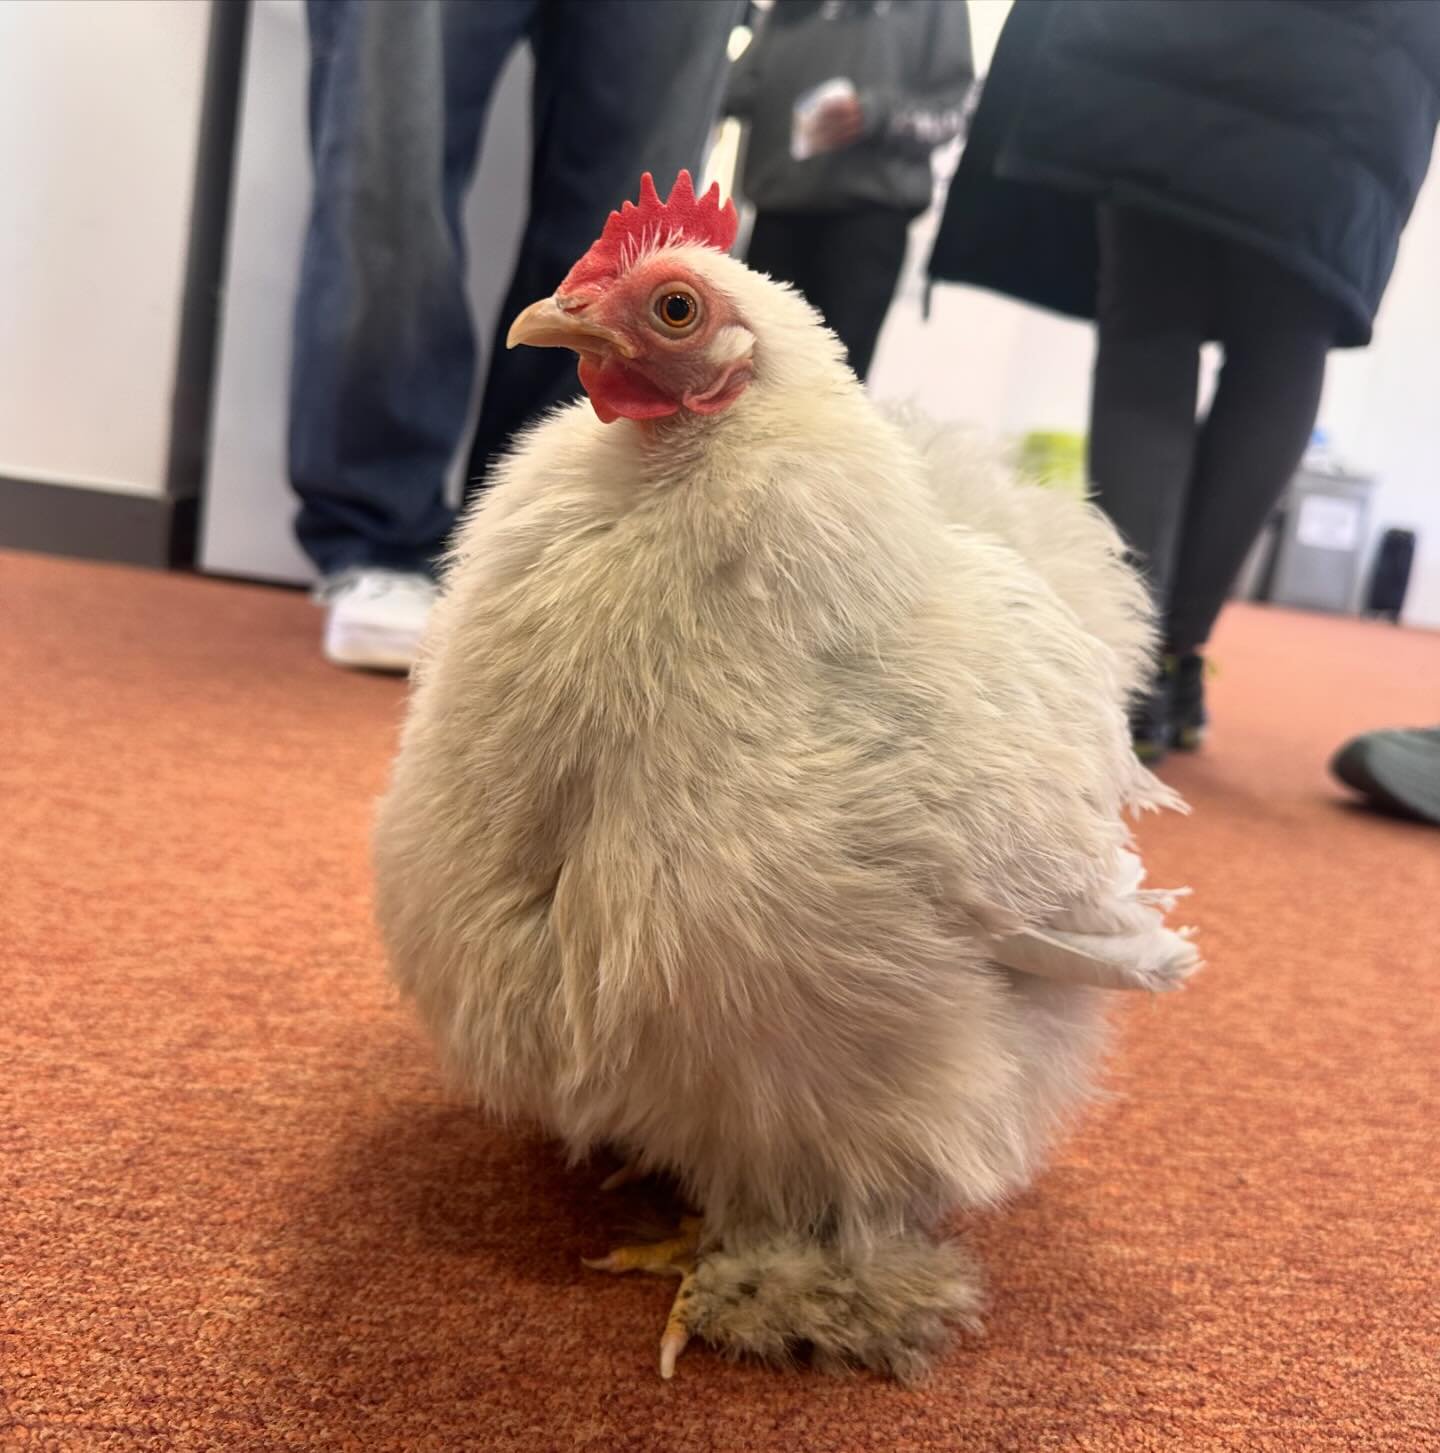 Miss Maggie has been up in Coventry today, meeting the cast and crew of a new BBC series we&rsquo;re starting next week. She has a big role in this one, wish her luck! 

#chicken #tvseries #bbc #production #productionlife #productioncompany #producti